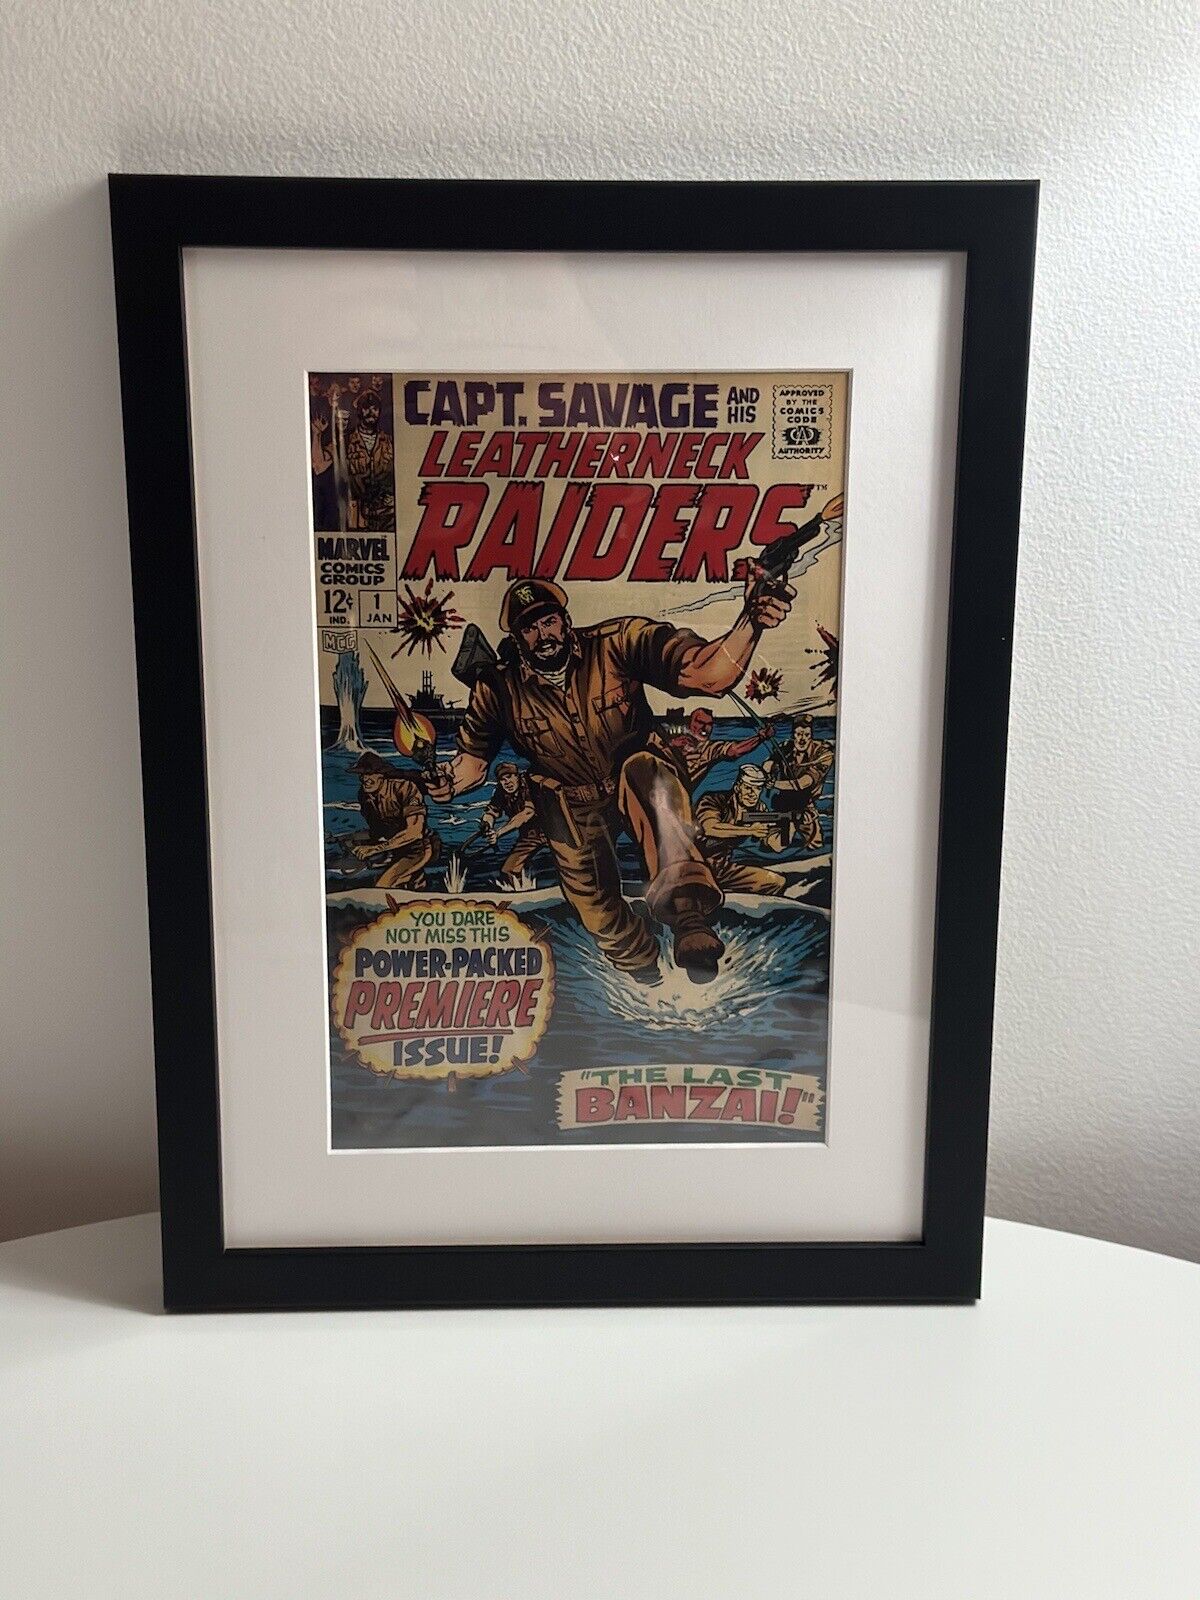 COLLECTORS DREAM FRAMED CAPT. SAVAGE reprint AND HIS LEATHERNECK RAIDERS 1968